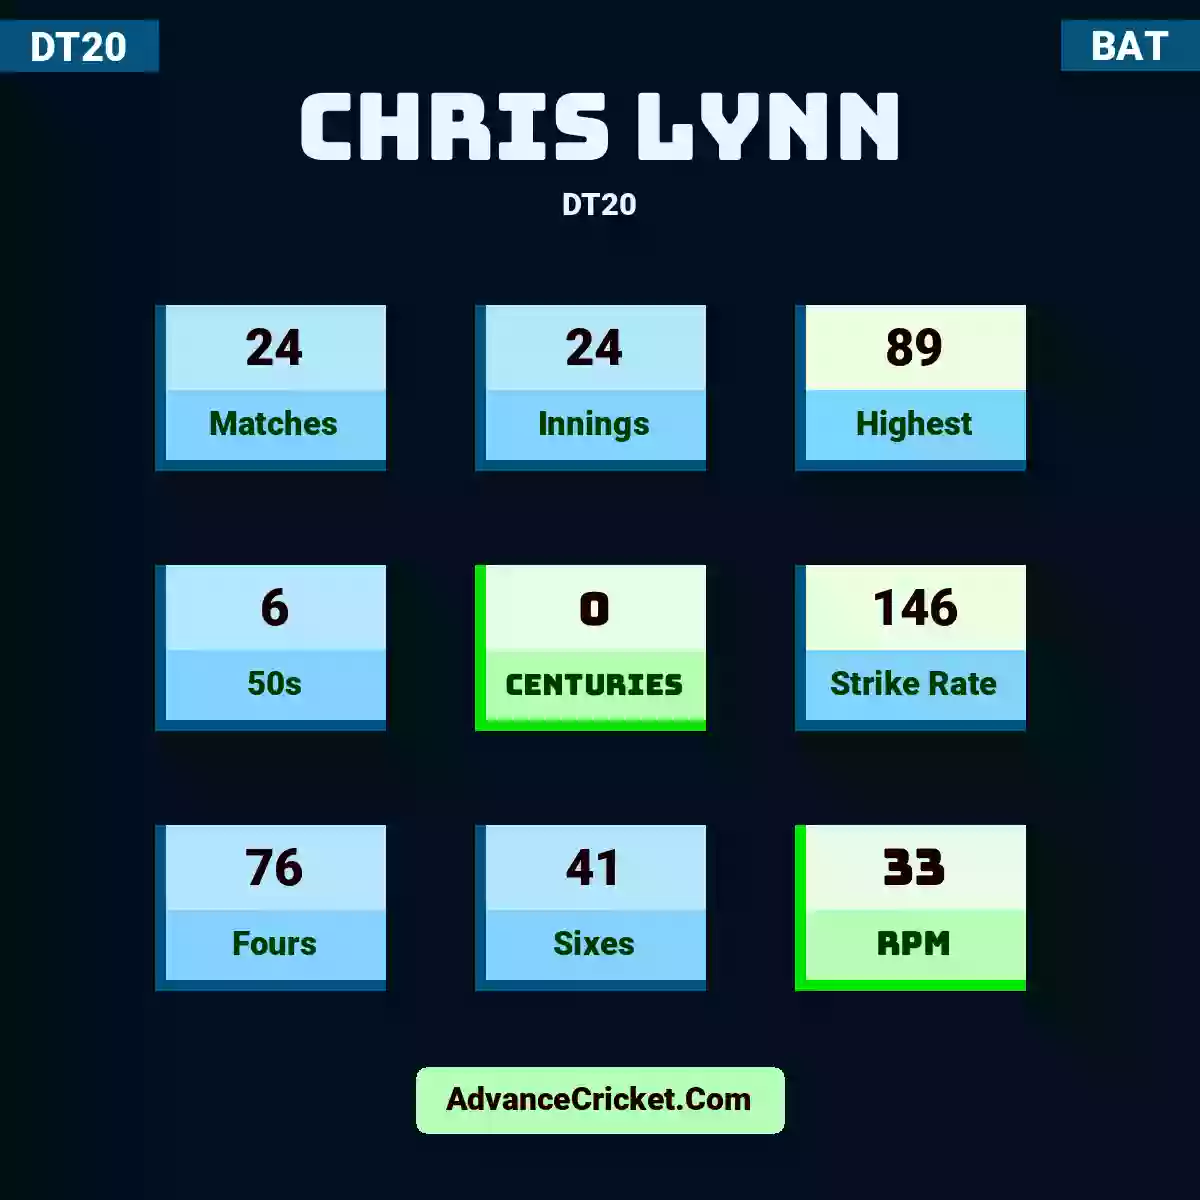 Chris Lynn DT20 , Chris Lynn played 24 matches, scored 89 runs as highest, 6 half-centuries, and 0 centuries, with a strike rate of 146. C.Lynn hit 76 fours and 41 sixes, with an RPM of 33.